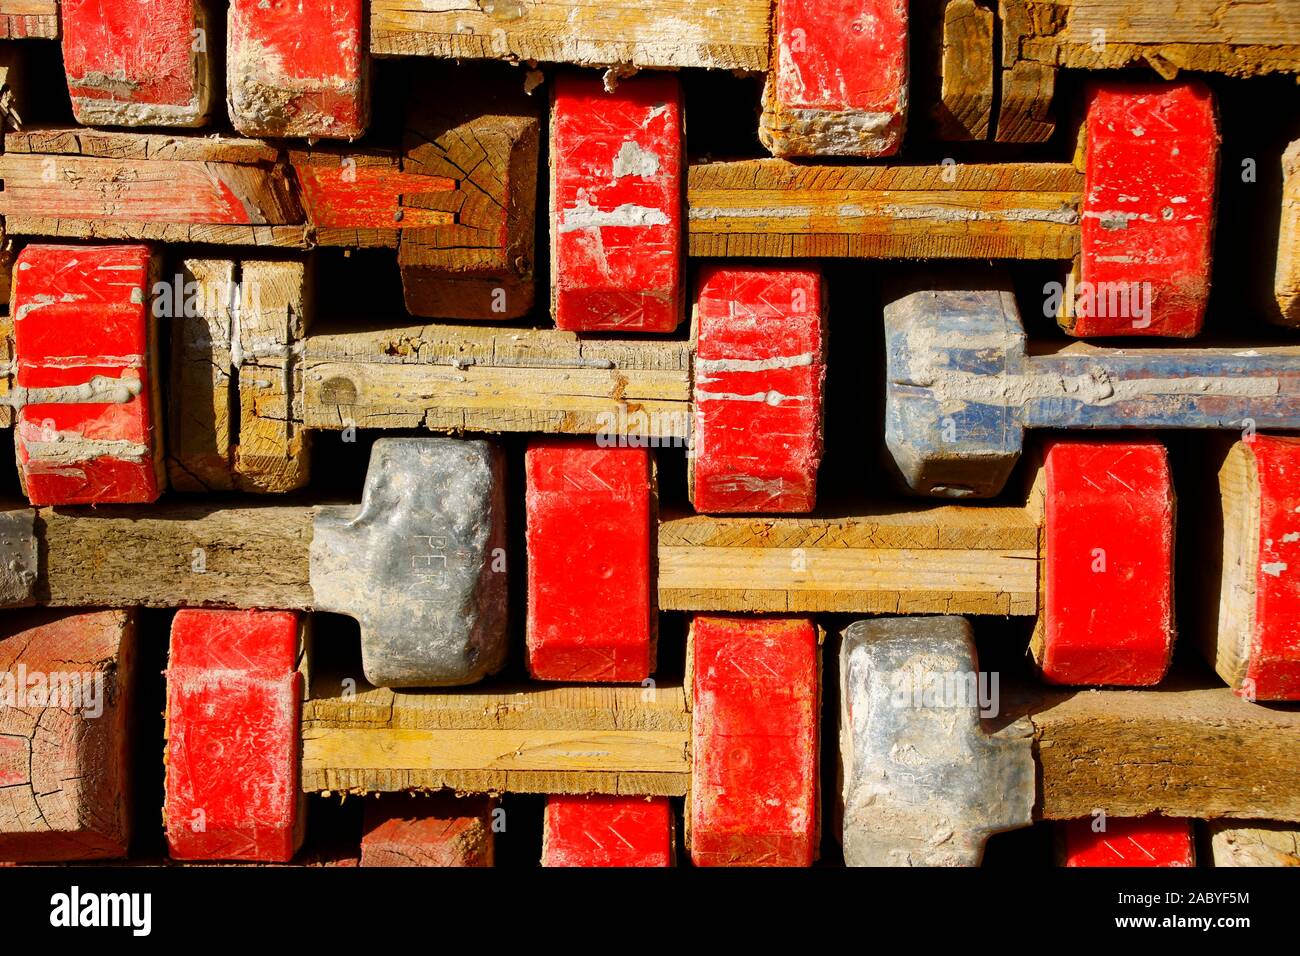 Wooden formwork beams were stacked on a pile Stock Photo